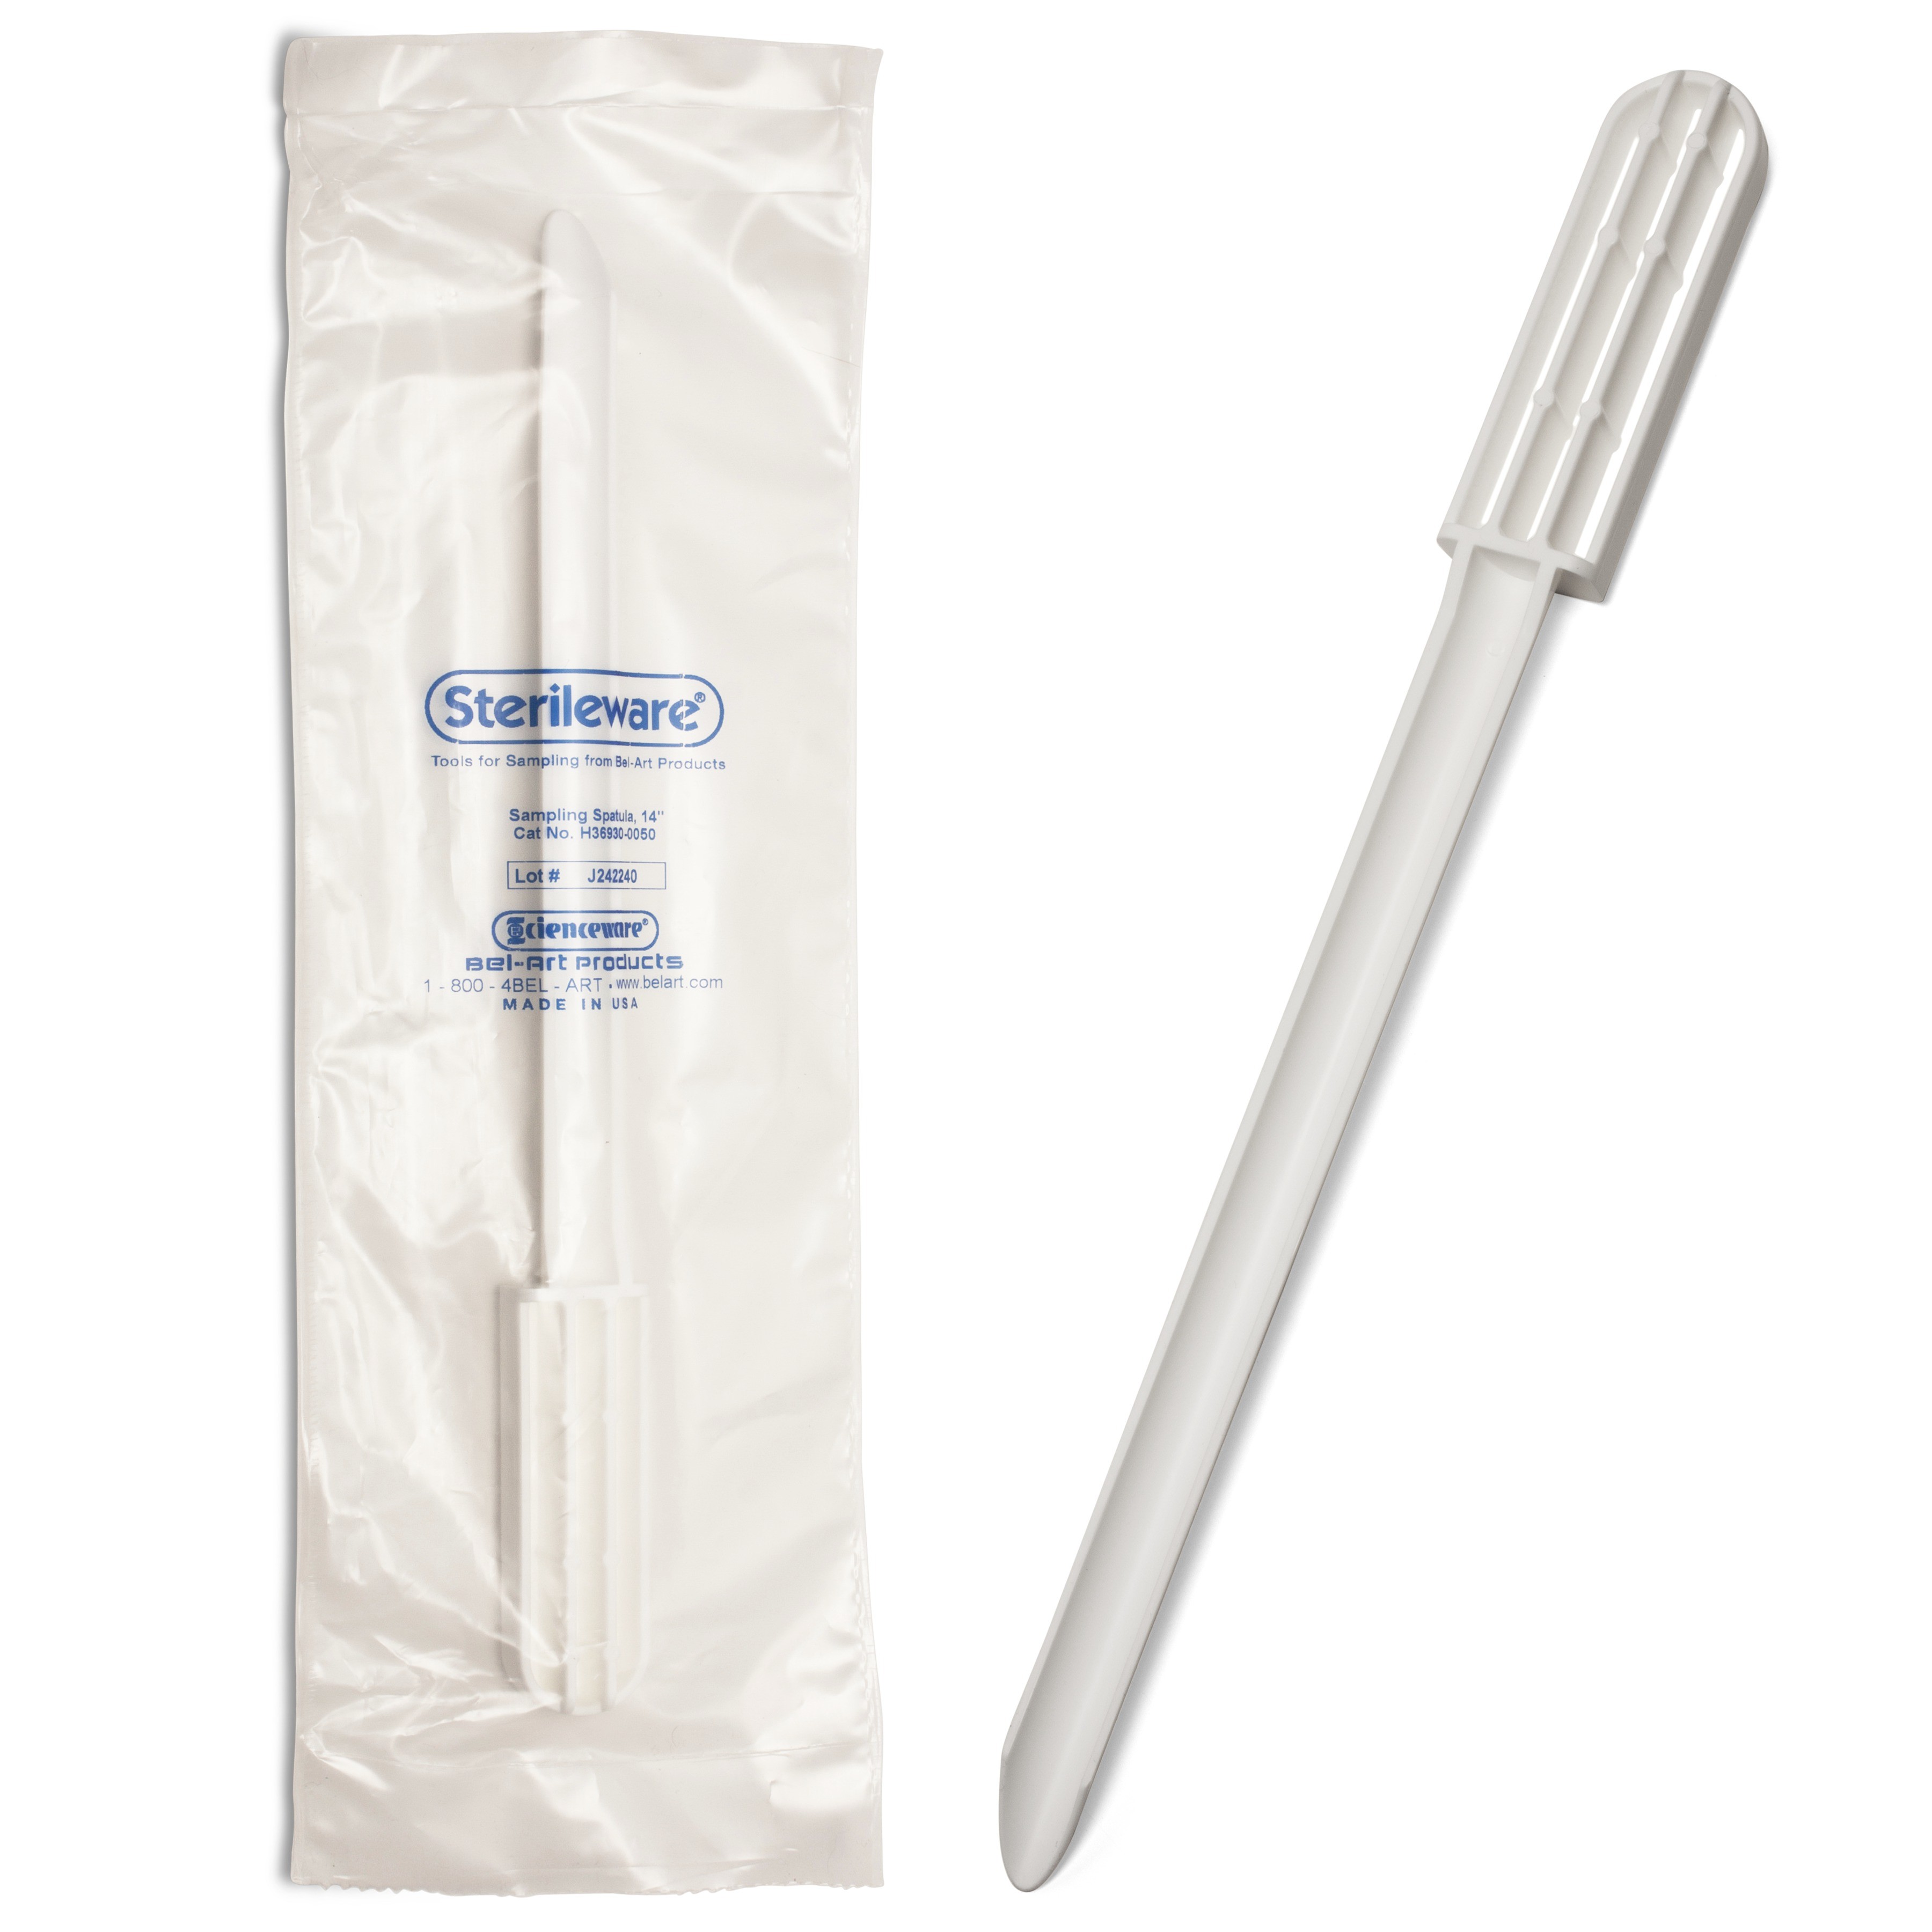 SP Bel-Art Sterileware Sampling Spatula; V Shaped, 14 in., Sterile Plastic, Individually Wrapped (Pack of 50)